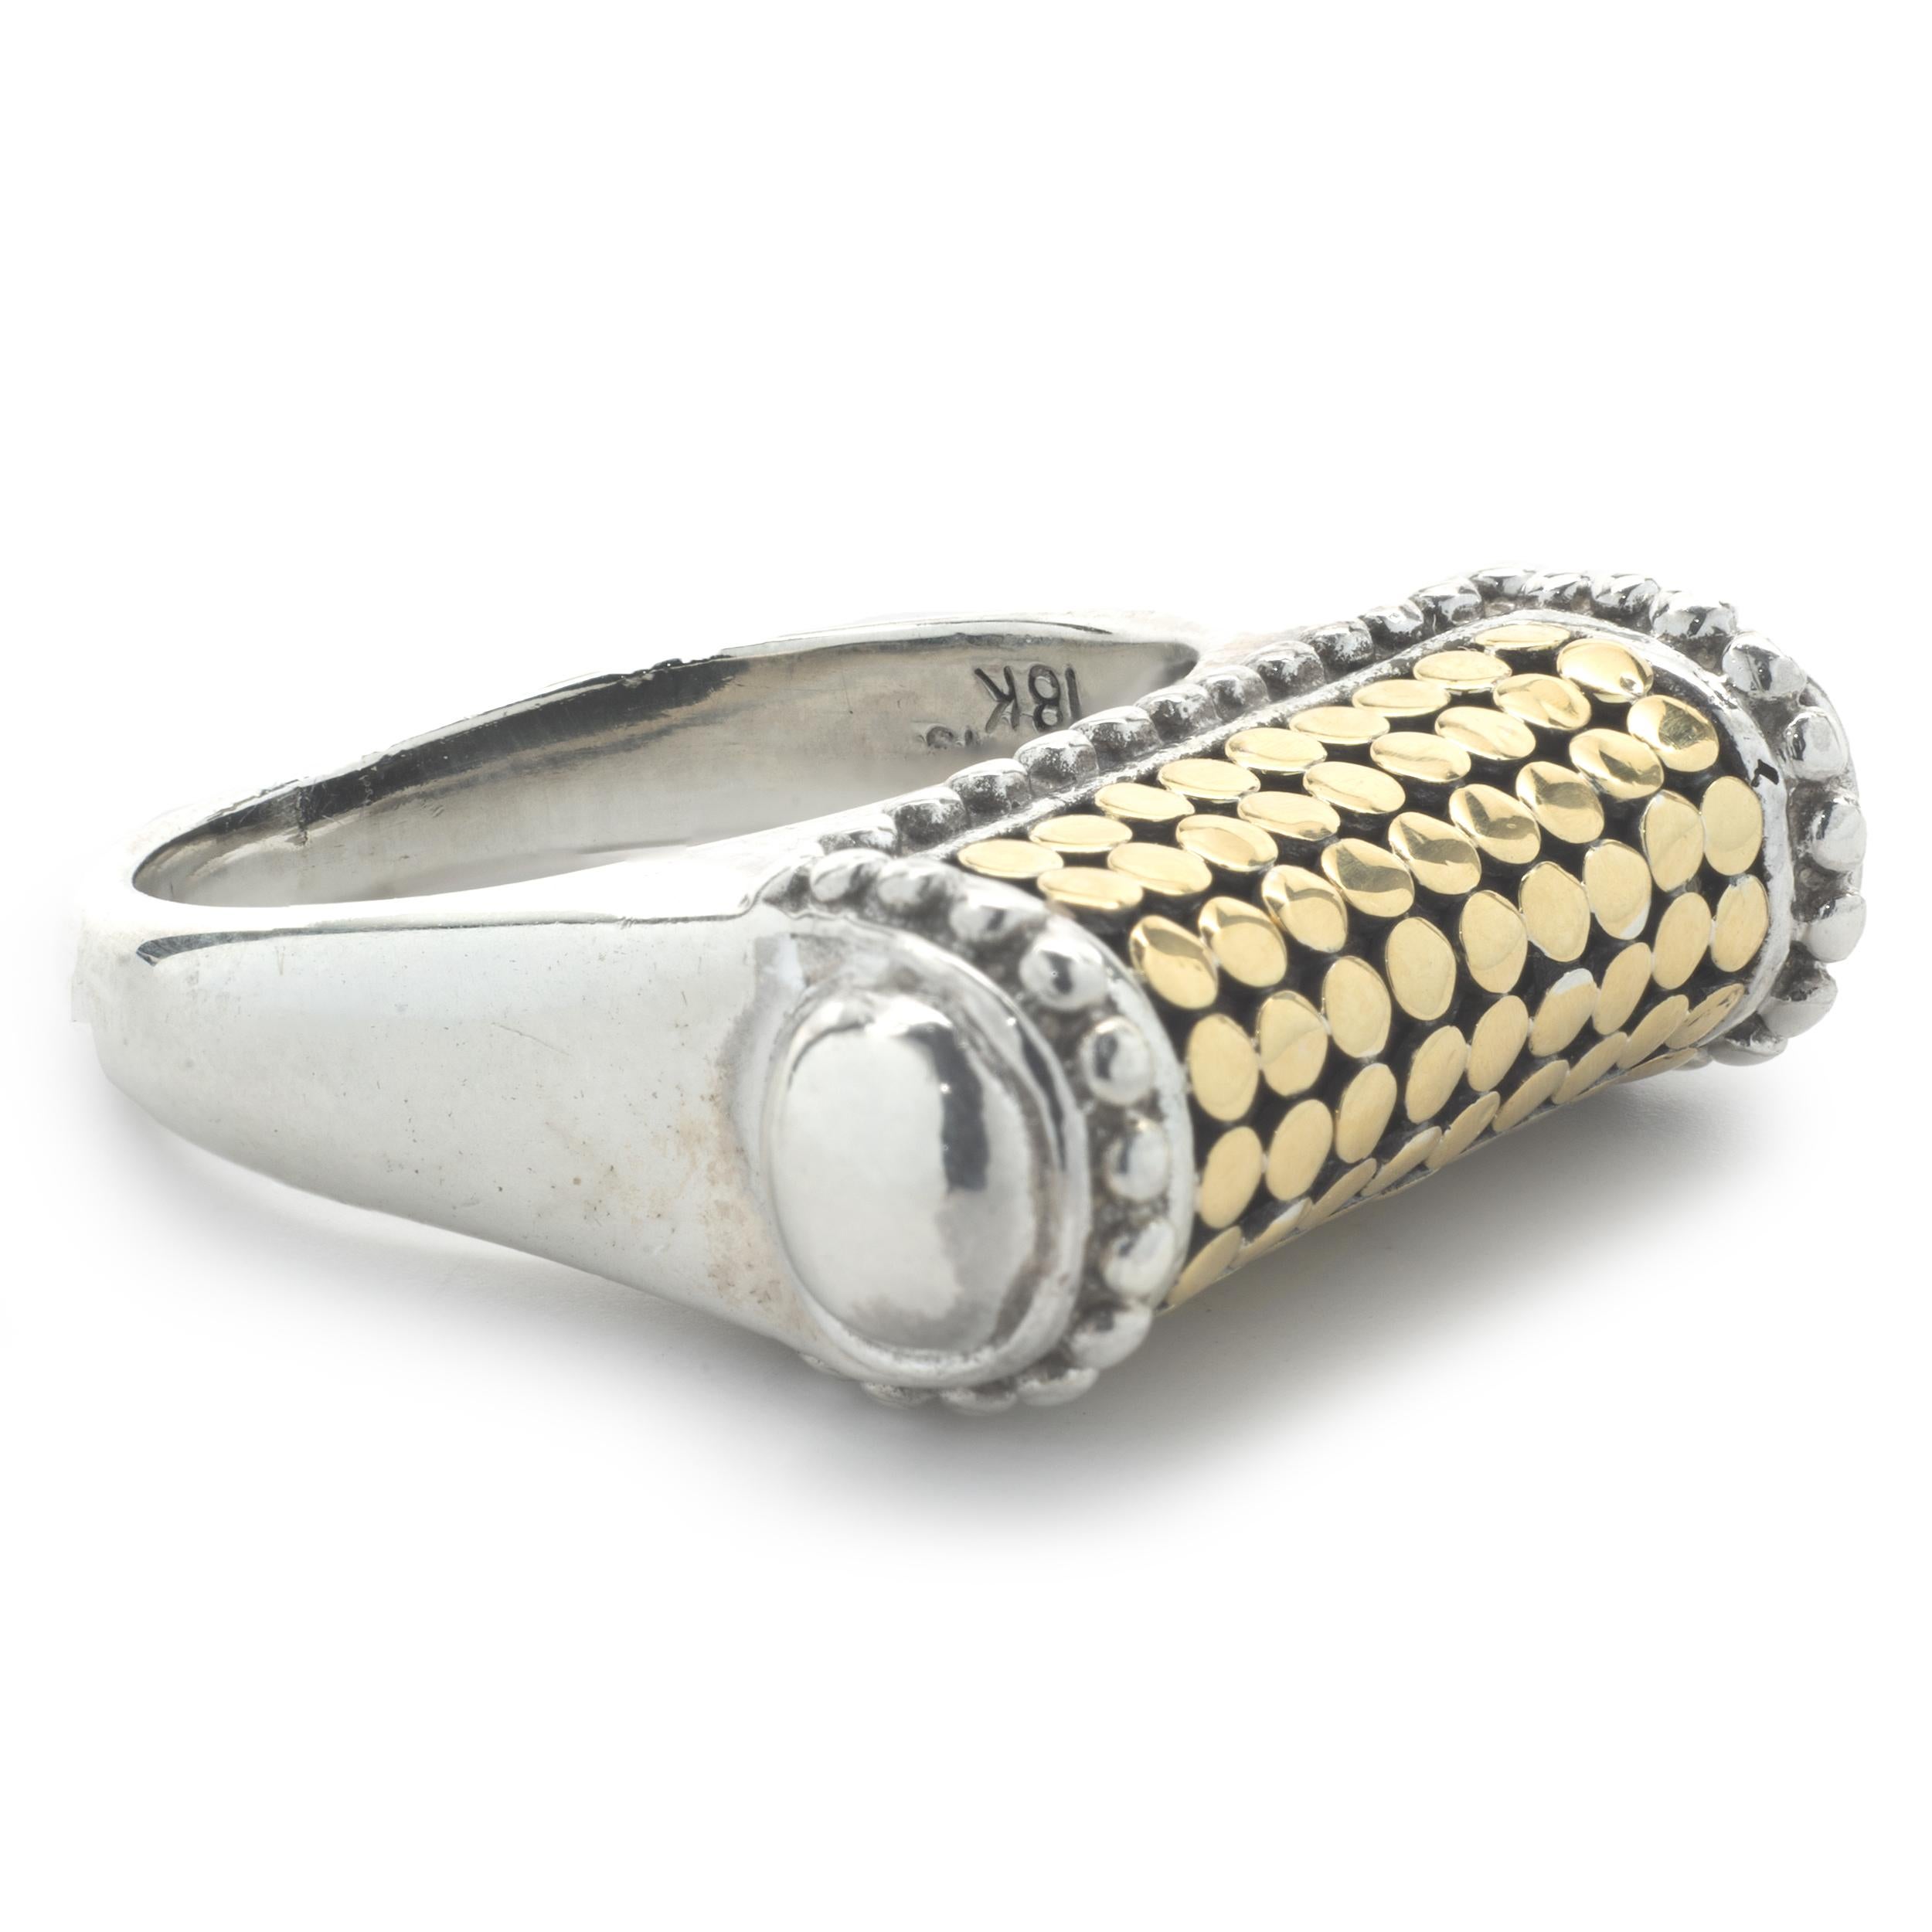 Designer: John Hardy
Material: 18K yellow gold / Sterling Silver
Dimensions: ring measures 8.4mm wide
Weight: 9.32 grams
